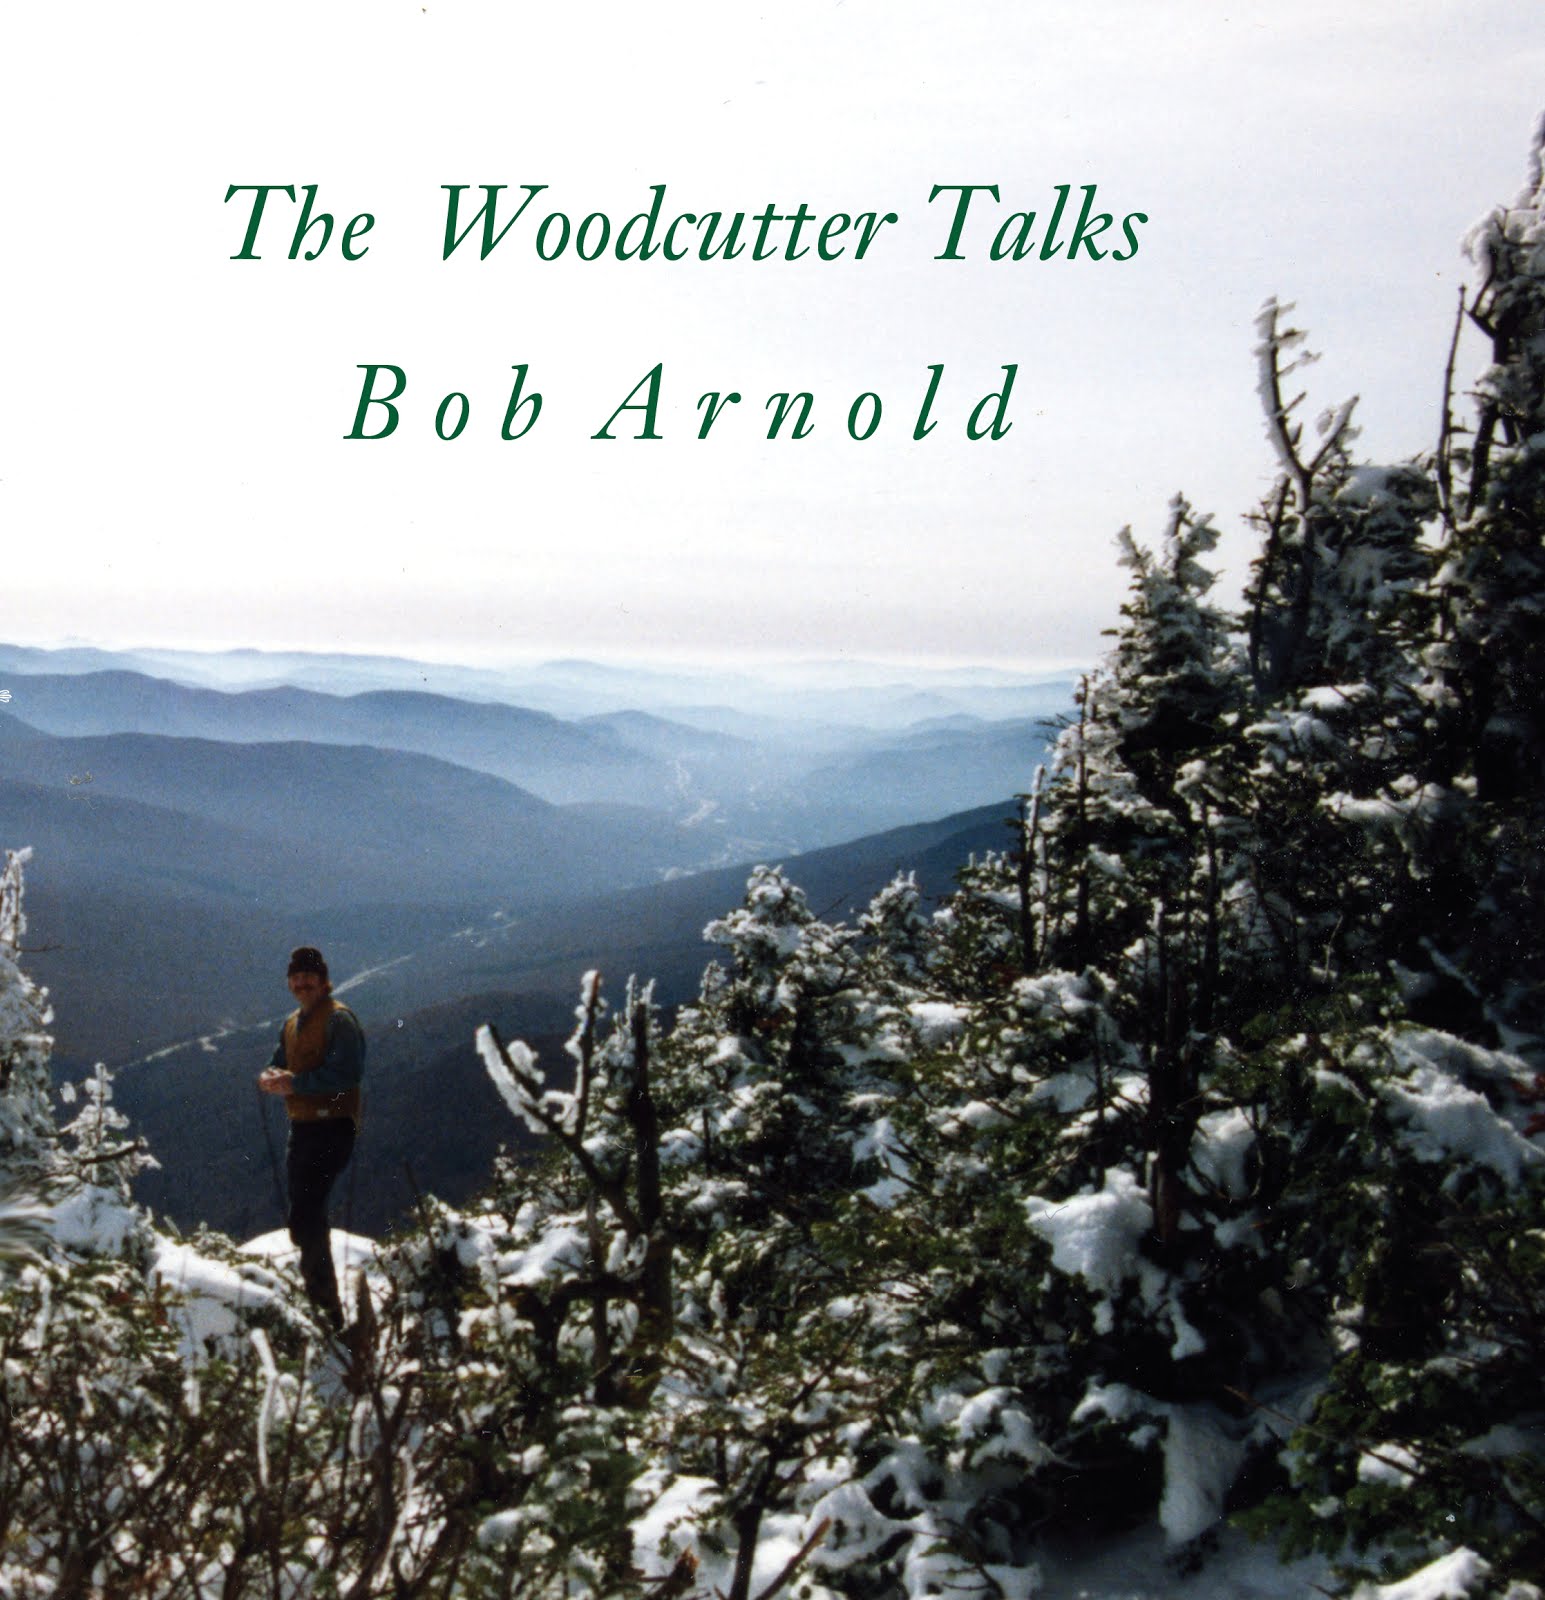 The Woodcutter Talks by Bob Arnold